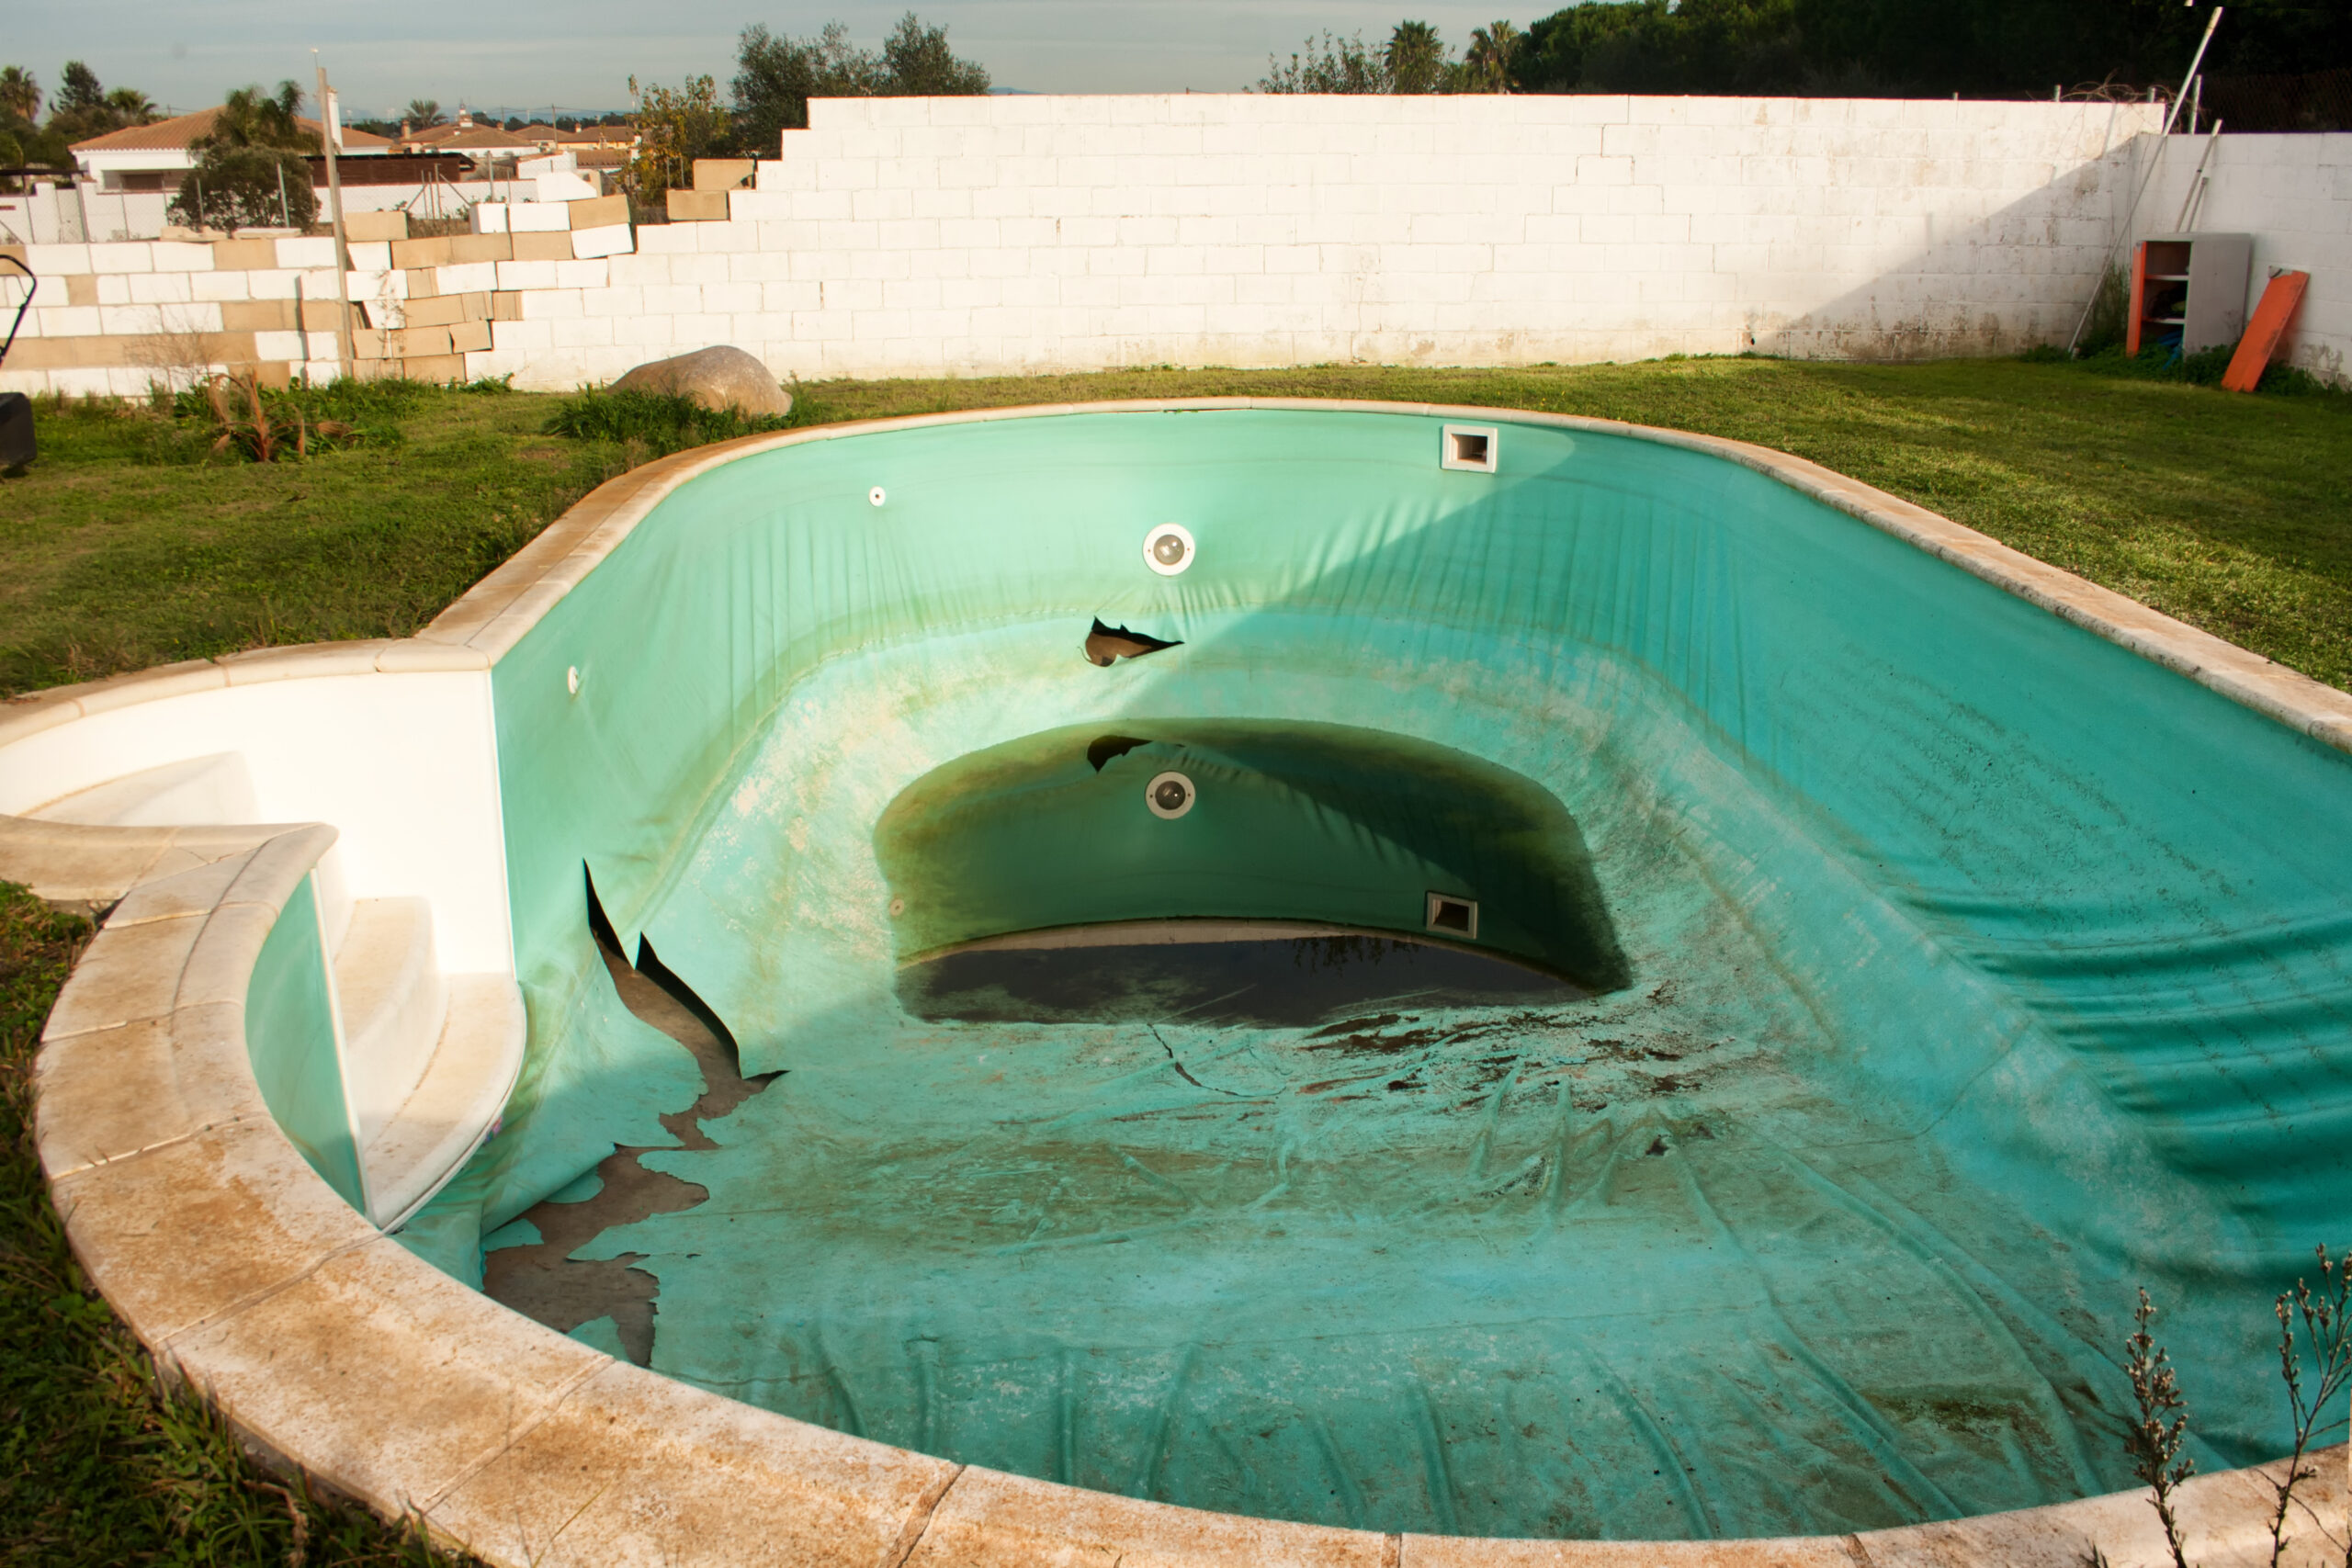 A pool in a state of disrepair and dirtiness, with visible damage and a buildup of debris and algae, requiring thorough cleaning and restoration